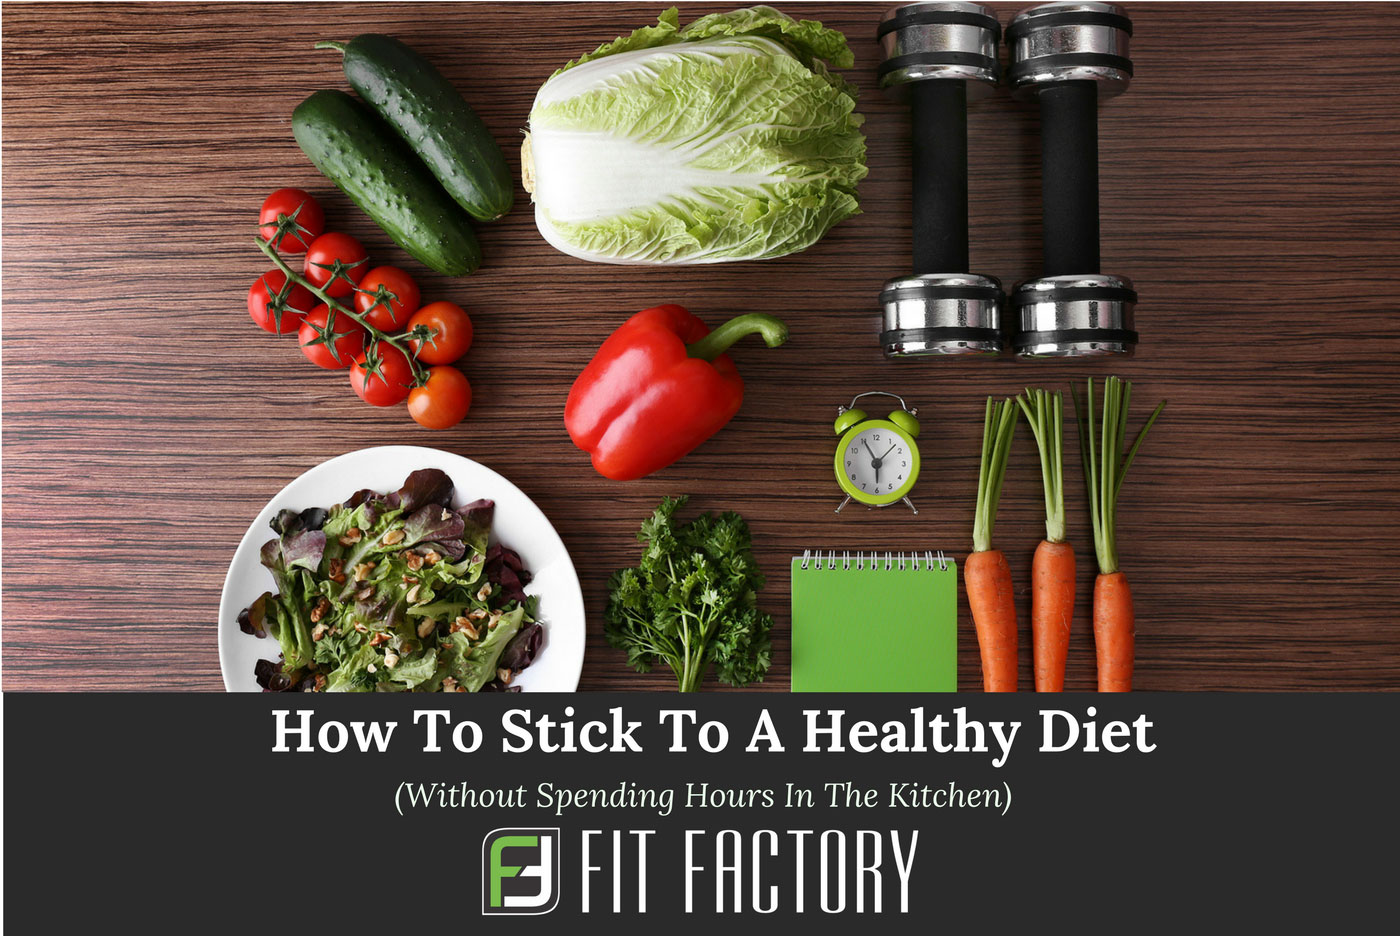 How To Stick to a Healthy Diet (Without Spending Hours in the Kitchen)